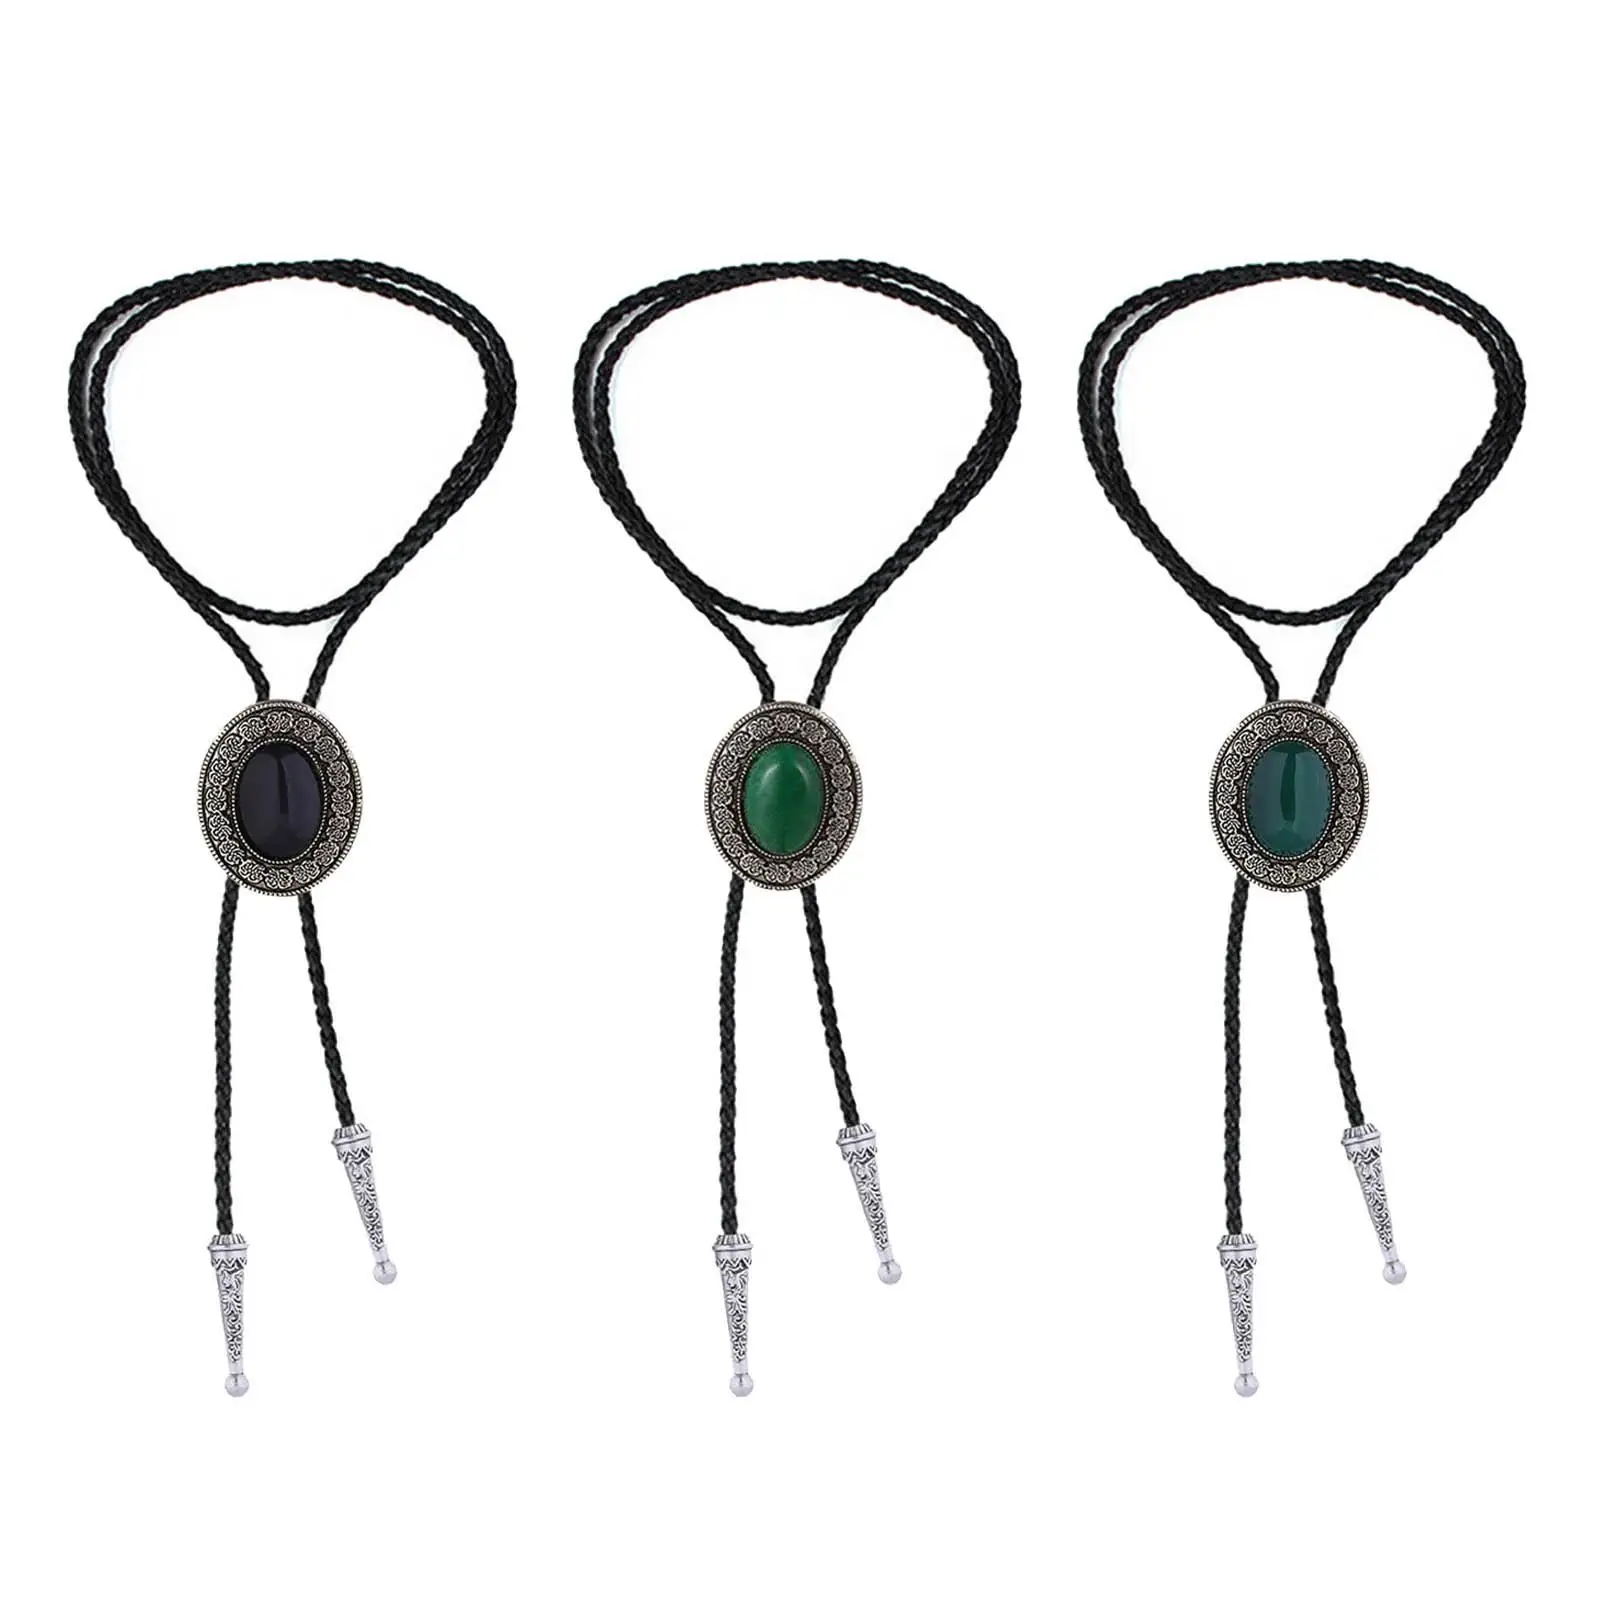 Native Western Bolo Tie for Men Round Shape with Natural Stone Handmade Bola Necktie American Bow Tie Collar Rope Men Women